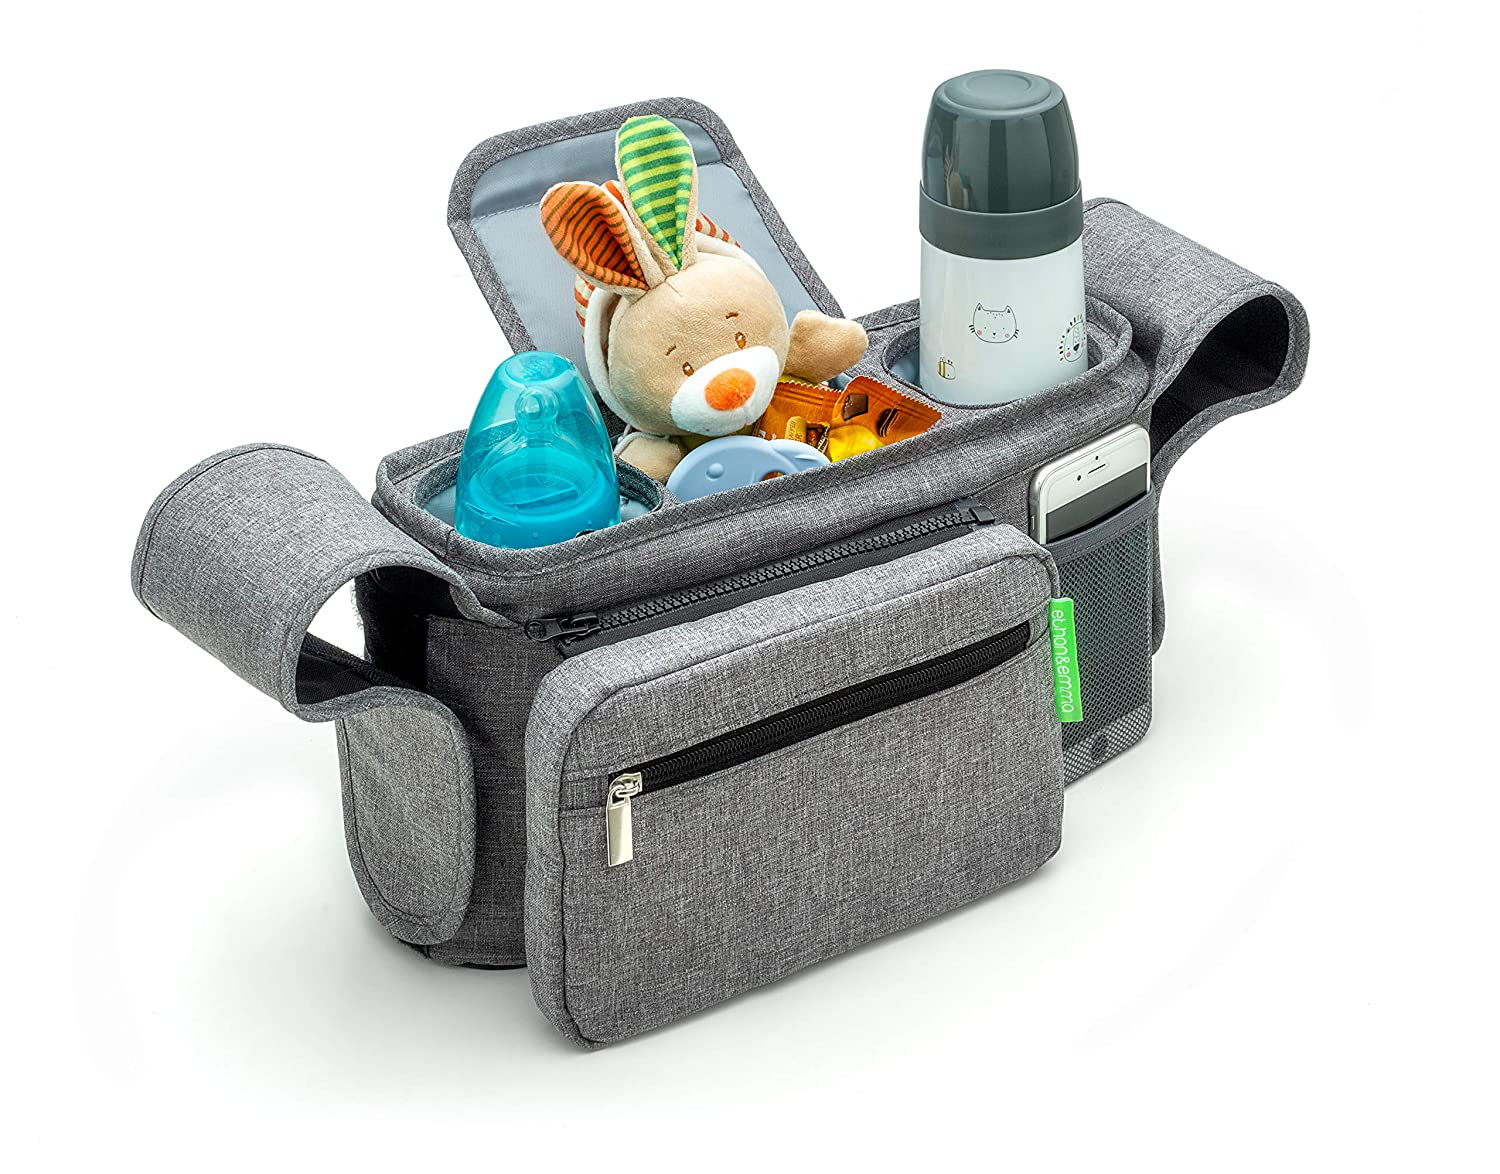 Momcozy Universal Stroller Organizer with Insulated Cup Holder